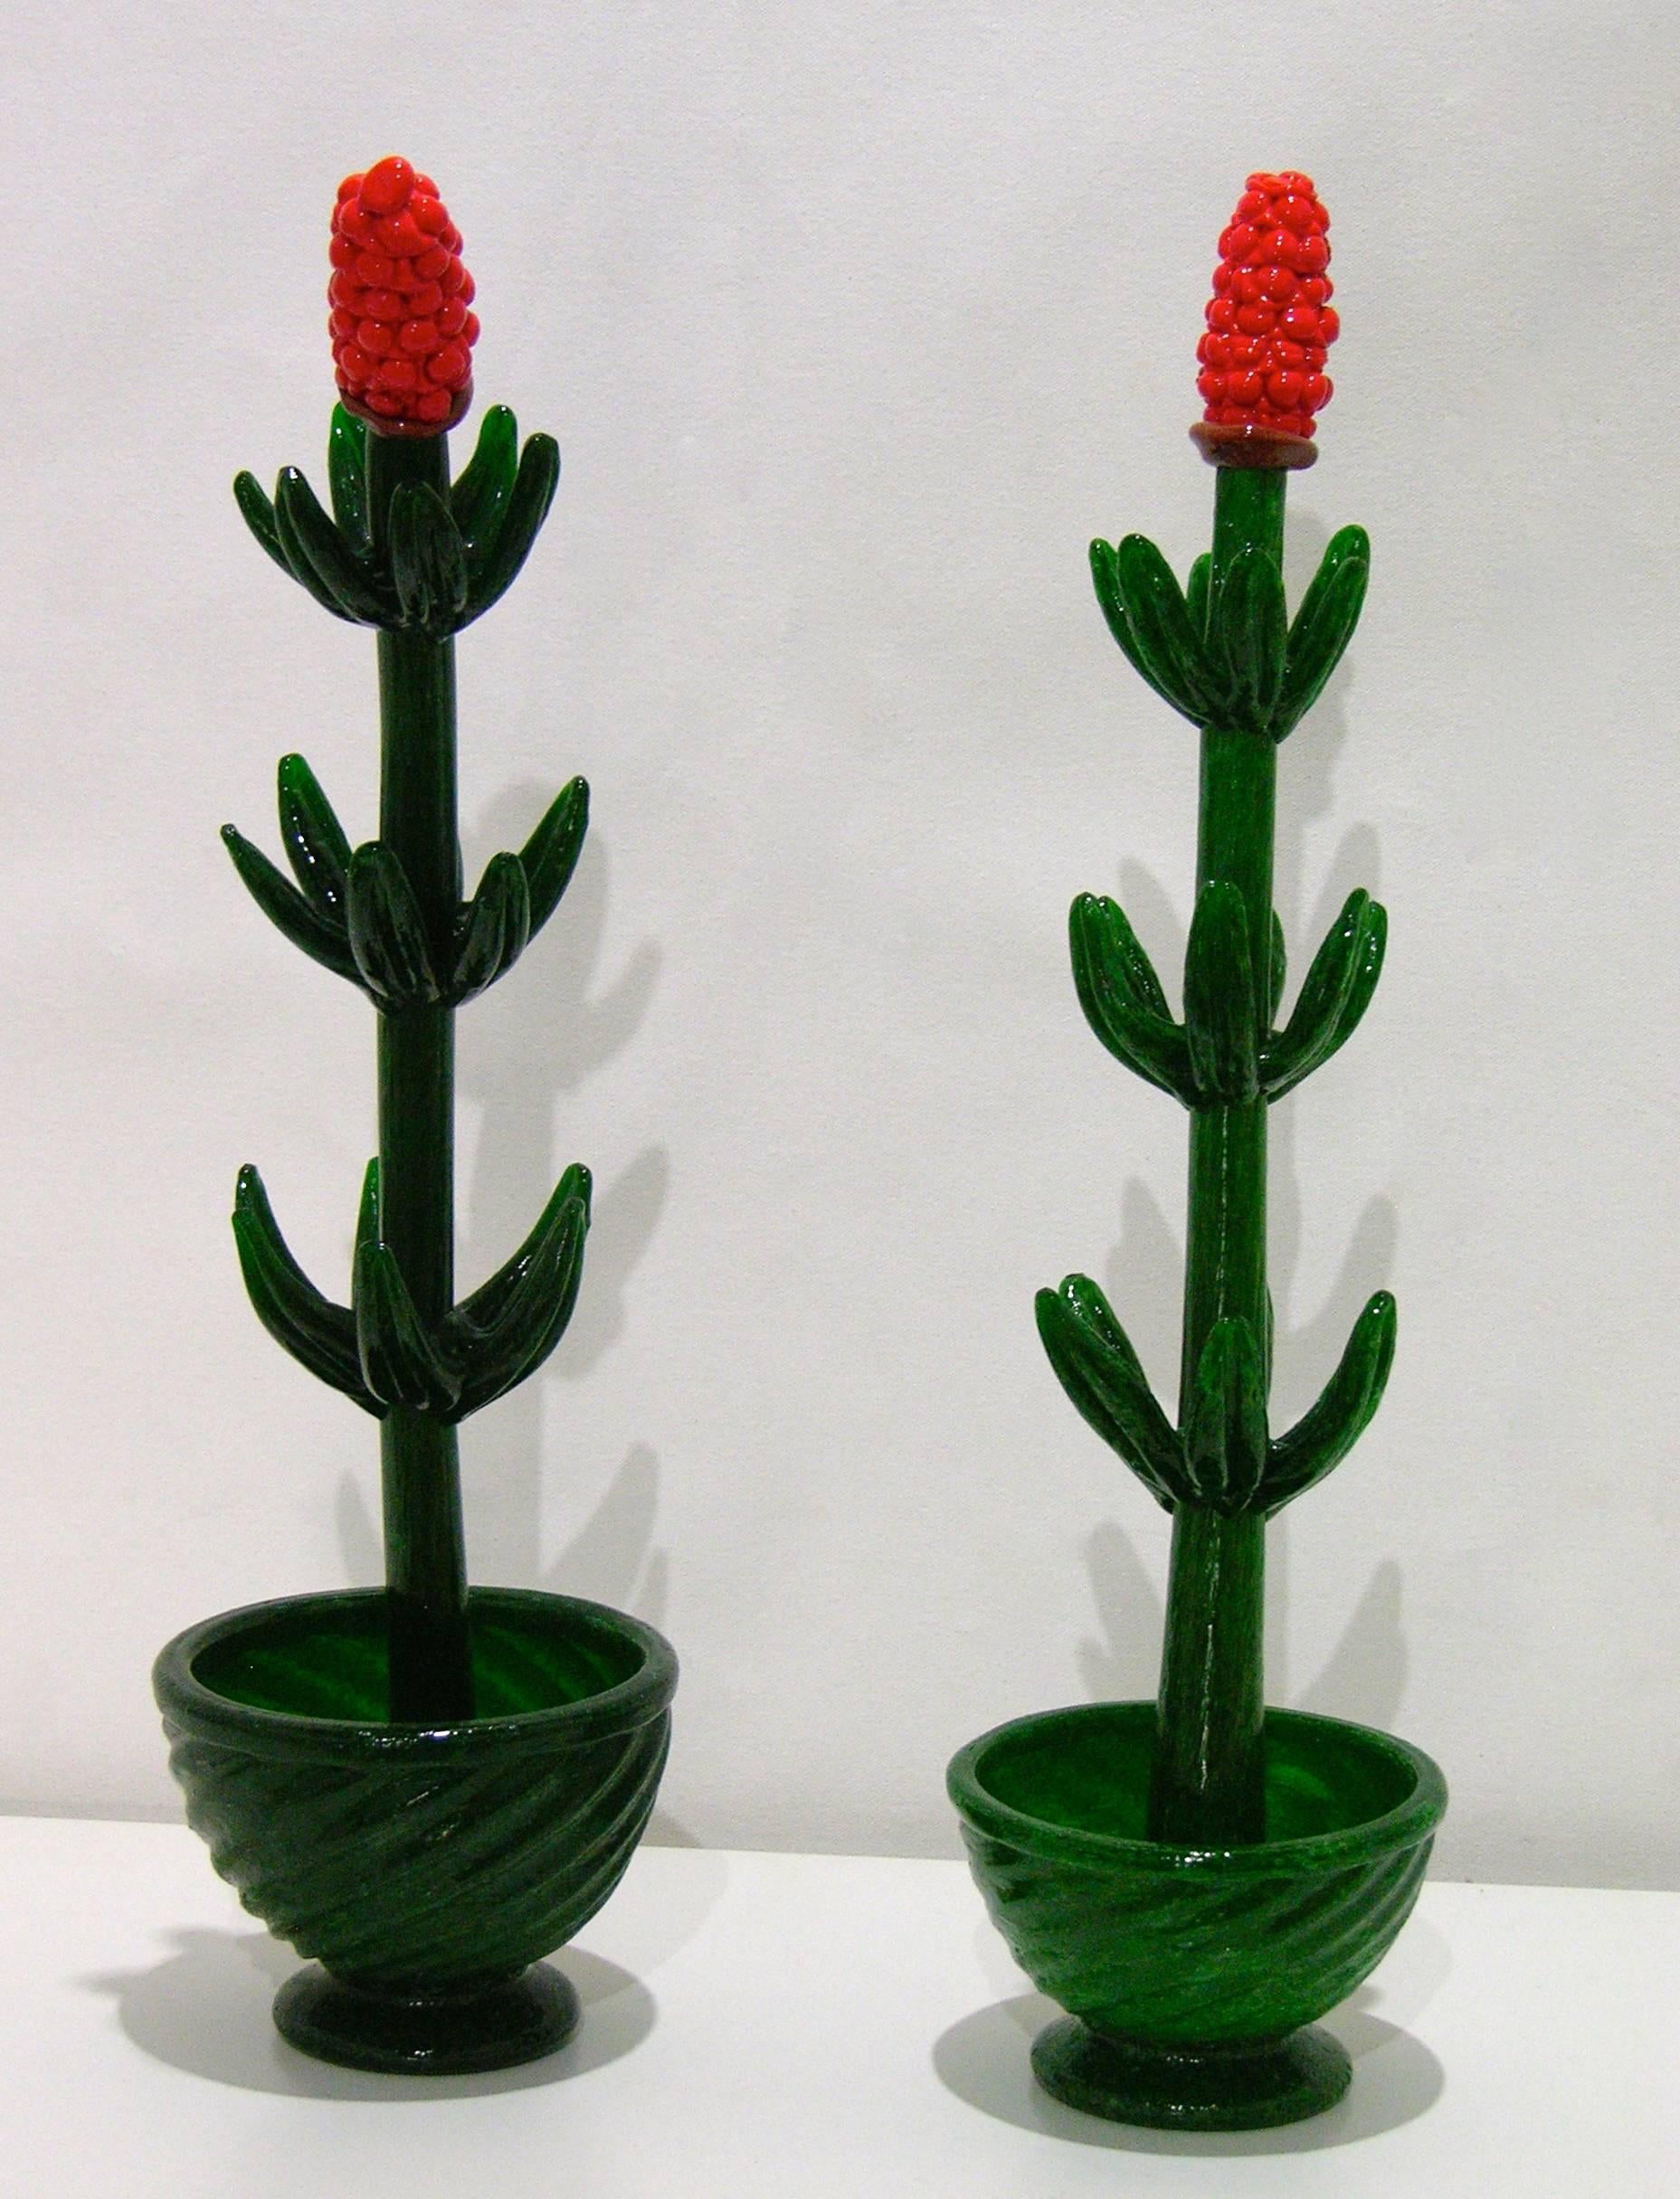 A whimsical Italian pair of flower plants in pots, exquisite quality of the blown Murano glass and detailing of organic execution, with textured stems and fleshy leaves, topped with red flowers so well realized that they seem real.
Ideal as